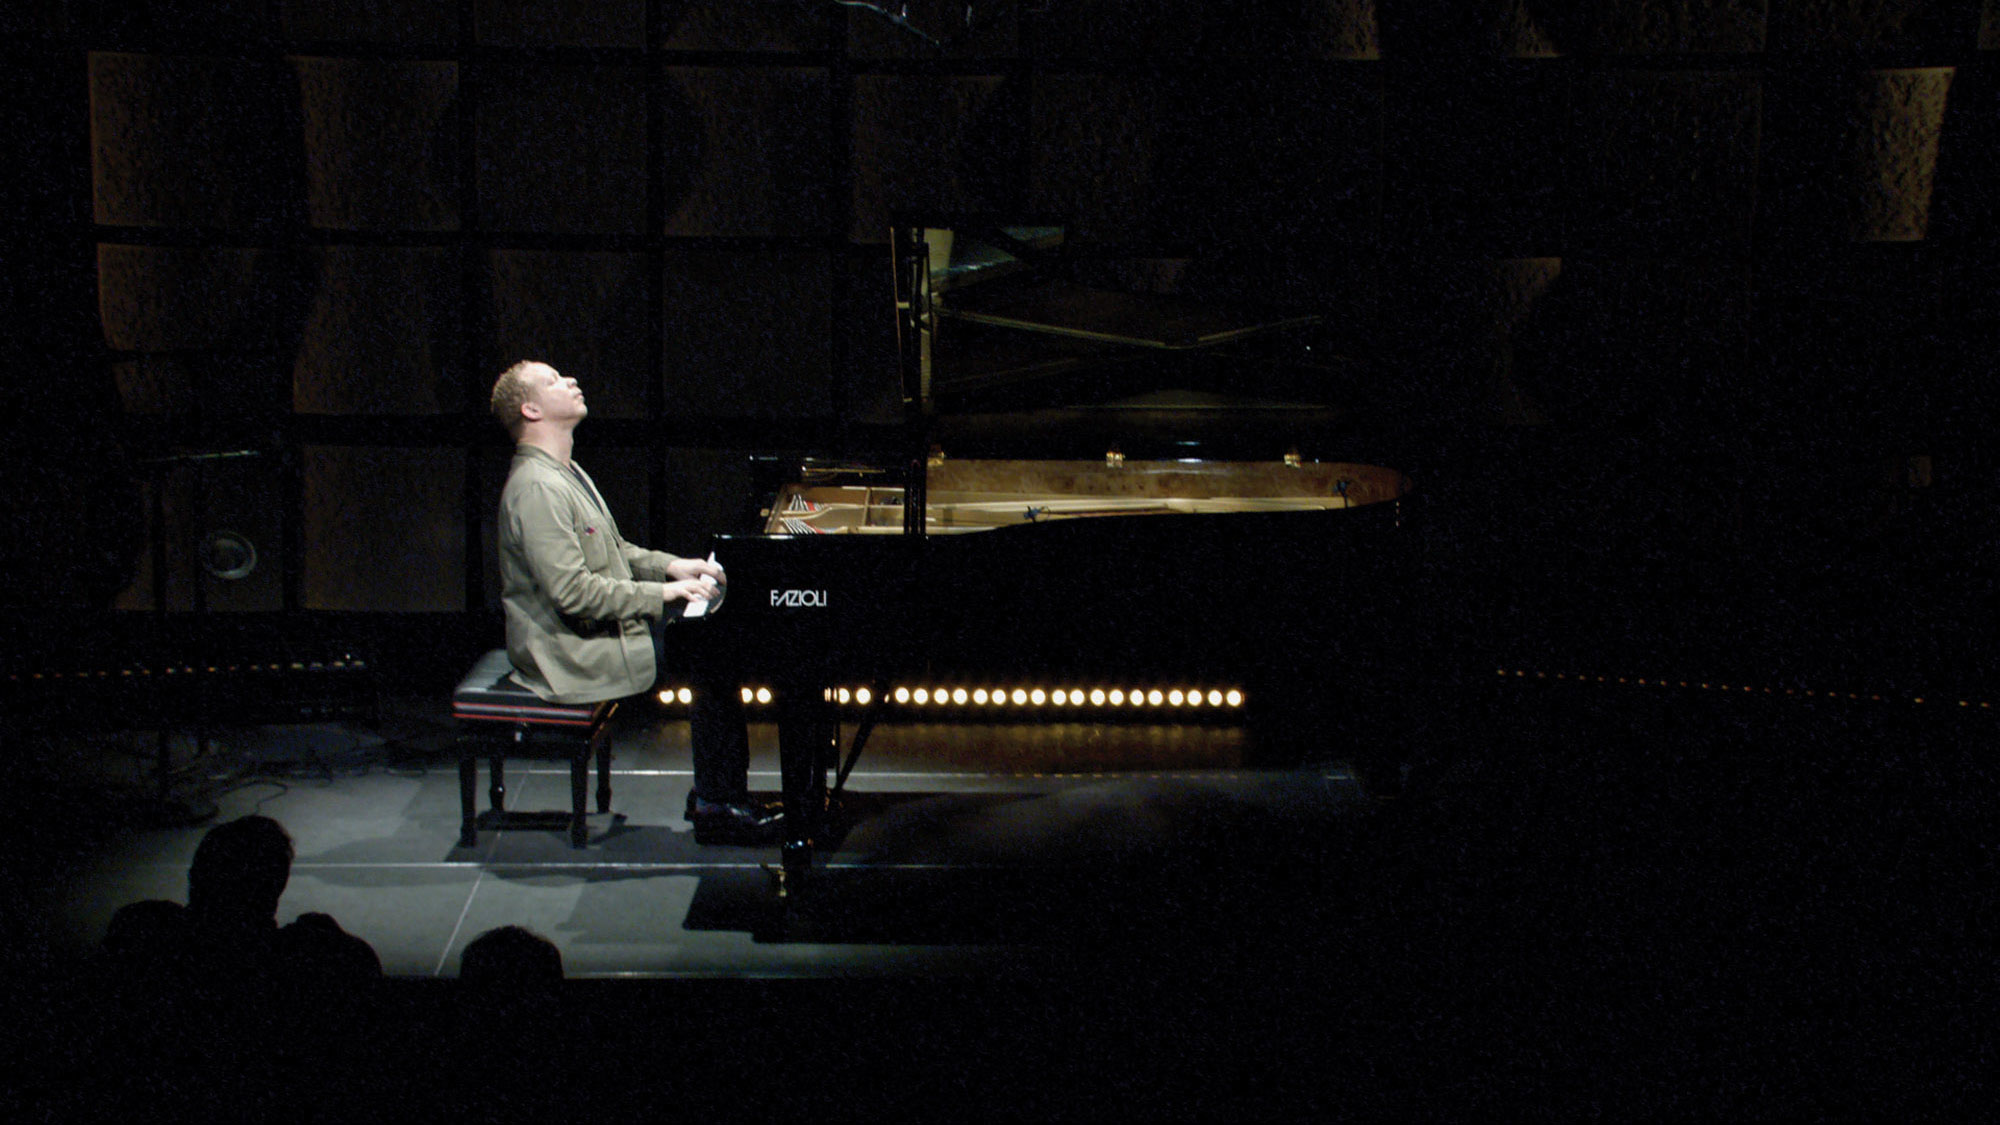 A man lifting his head towards the ceiling with eyes closed in a moment of reverence as he plays a grand piano on a dark stage in a spotlight. 